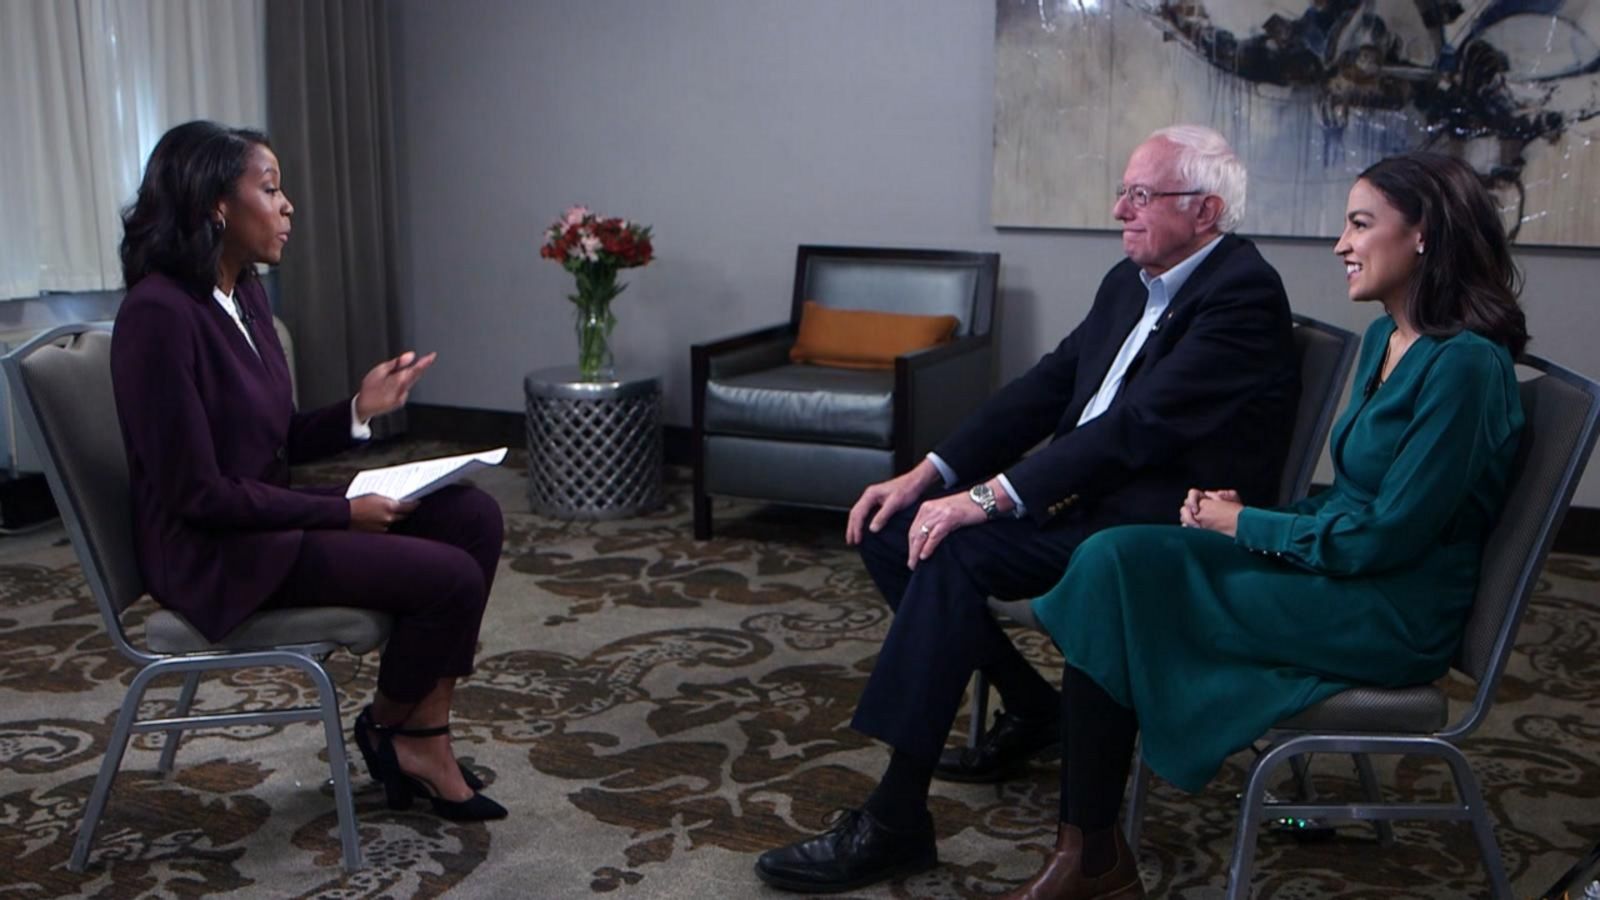 Sanders and Ocasio-Cortez criticize potential 2020 run by Bloomberg ...